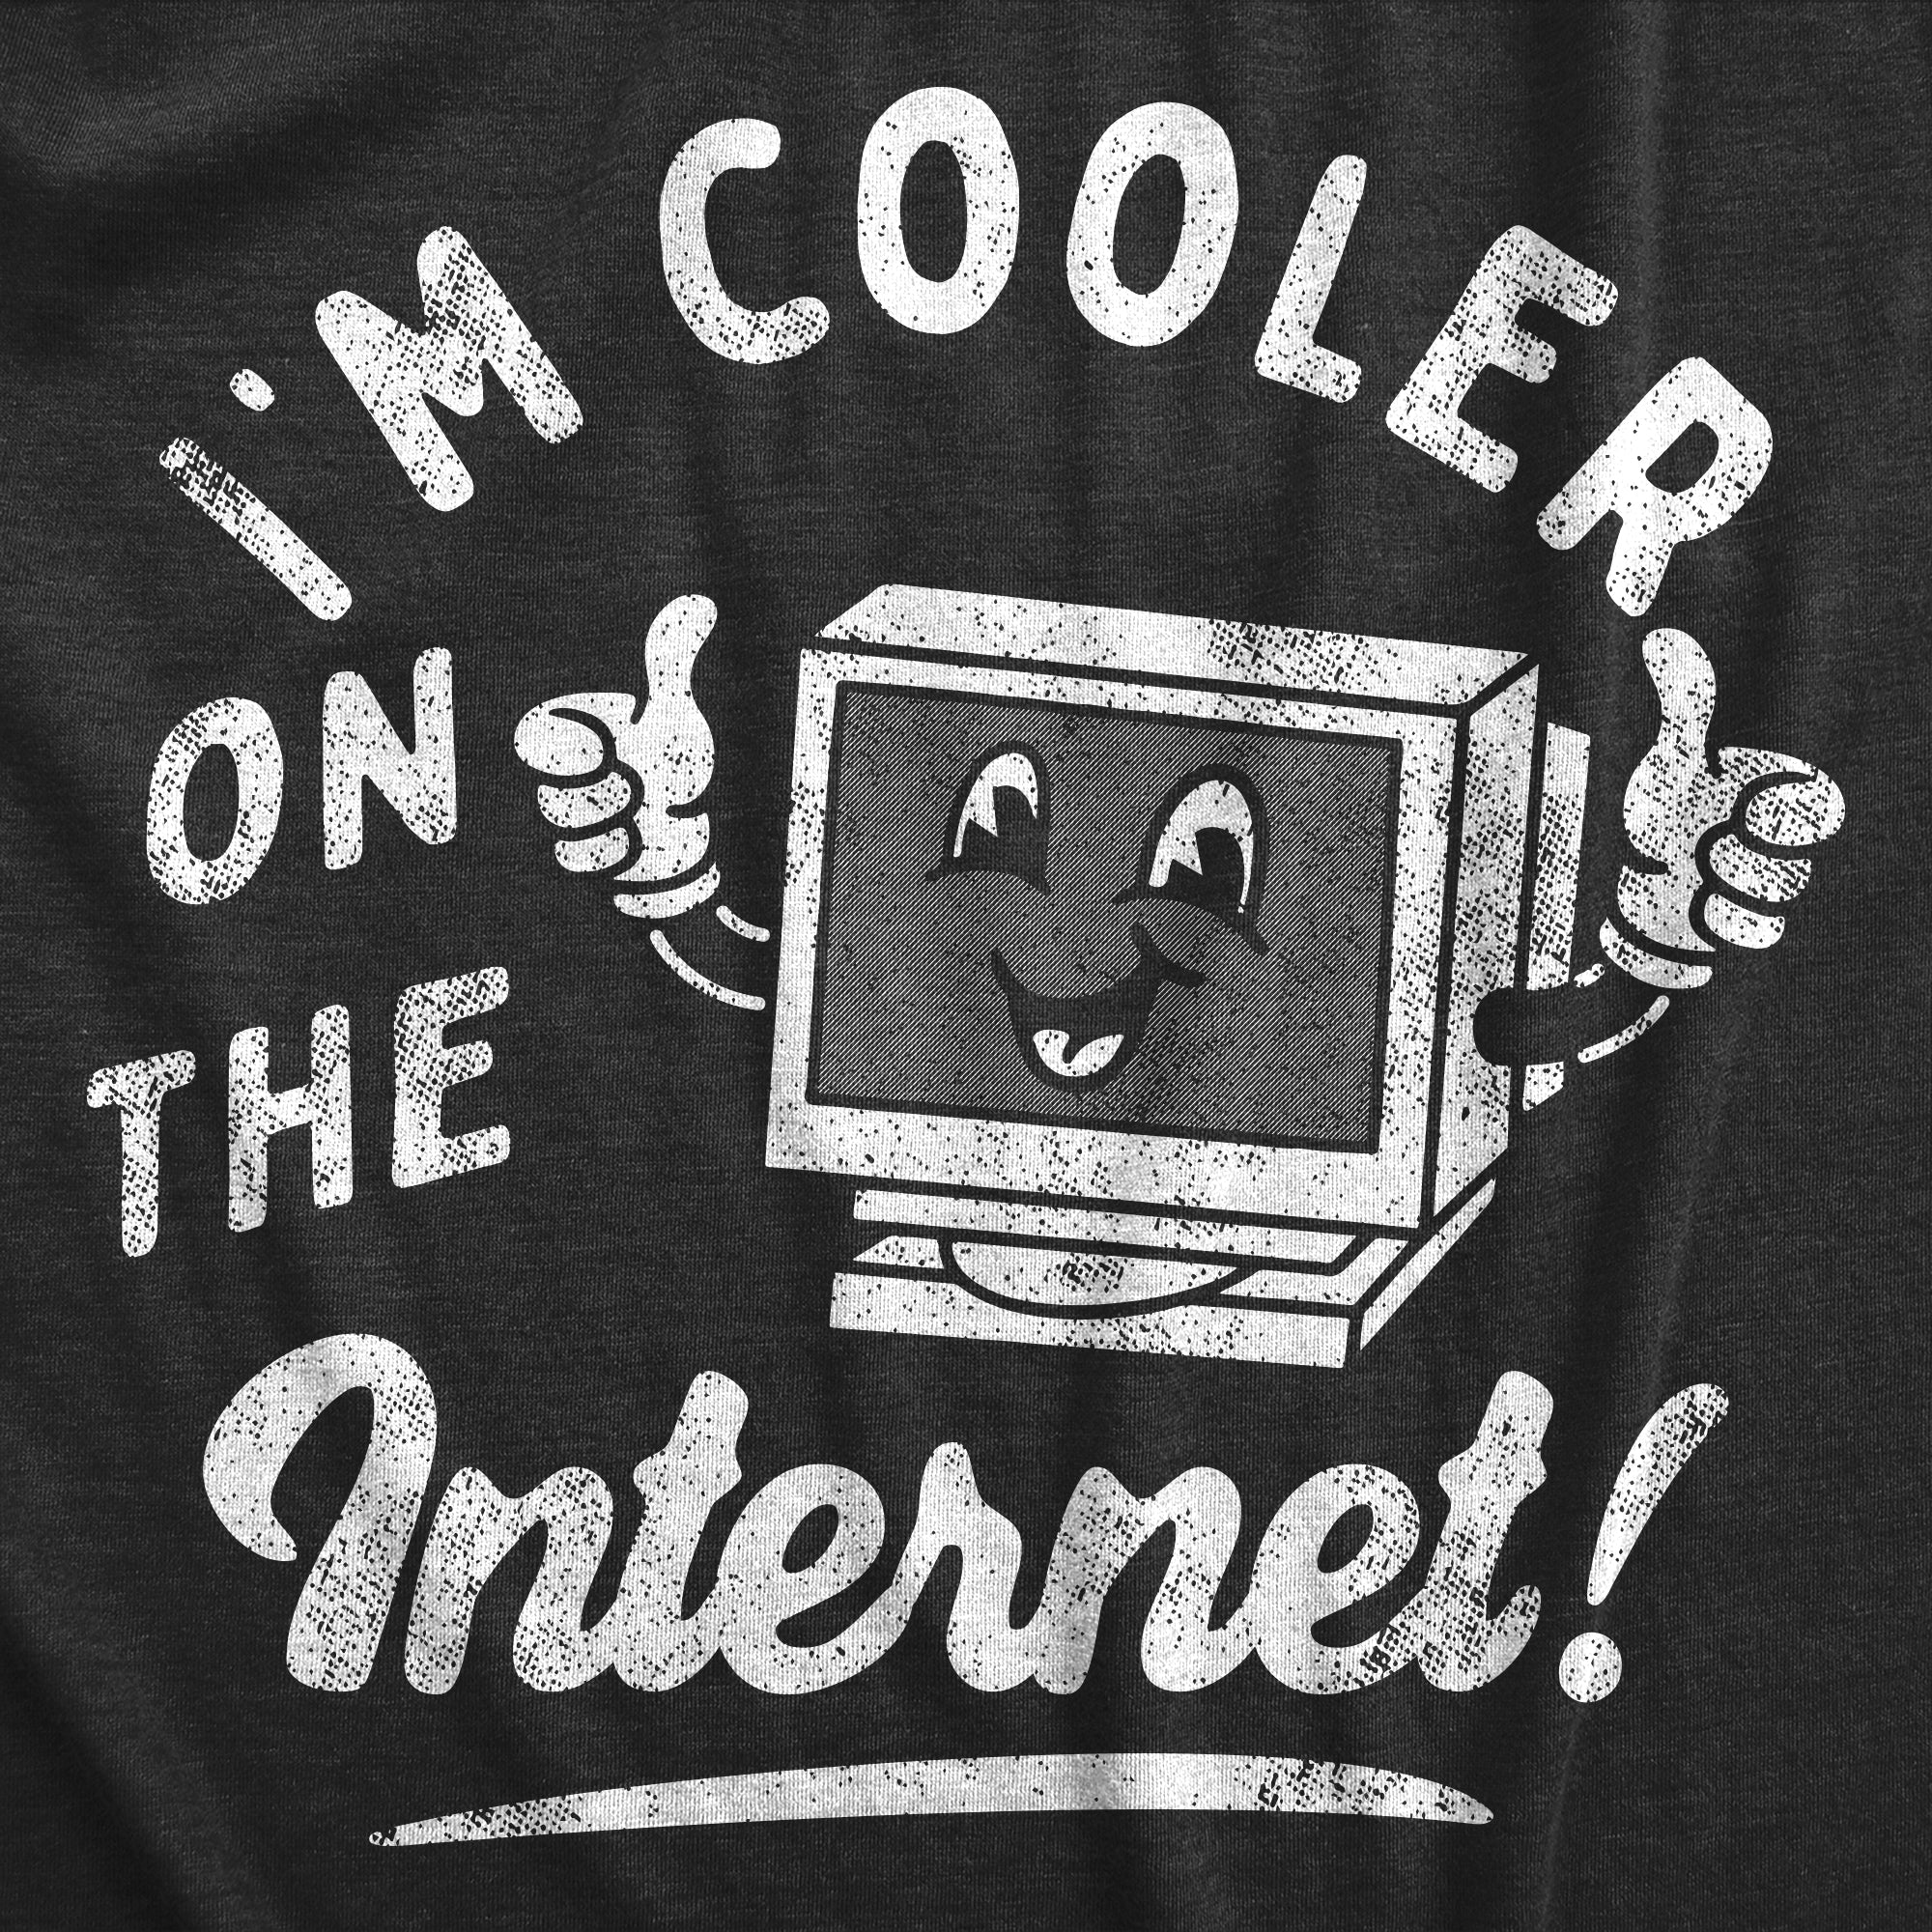 Funny Heather Black - COOLER Im Cooler On The Internet Womens T Shirt Nerdy internet sarcastic Tee